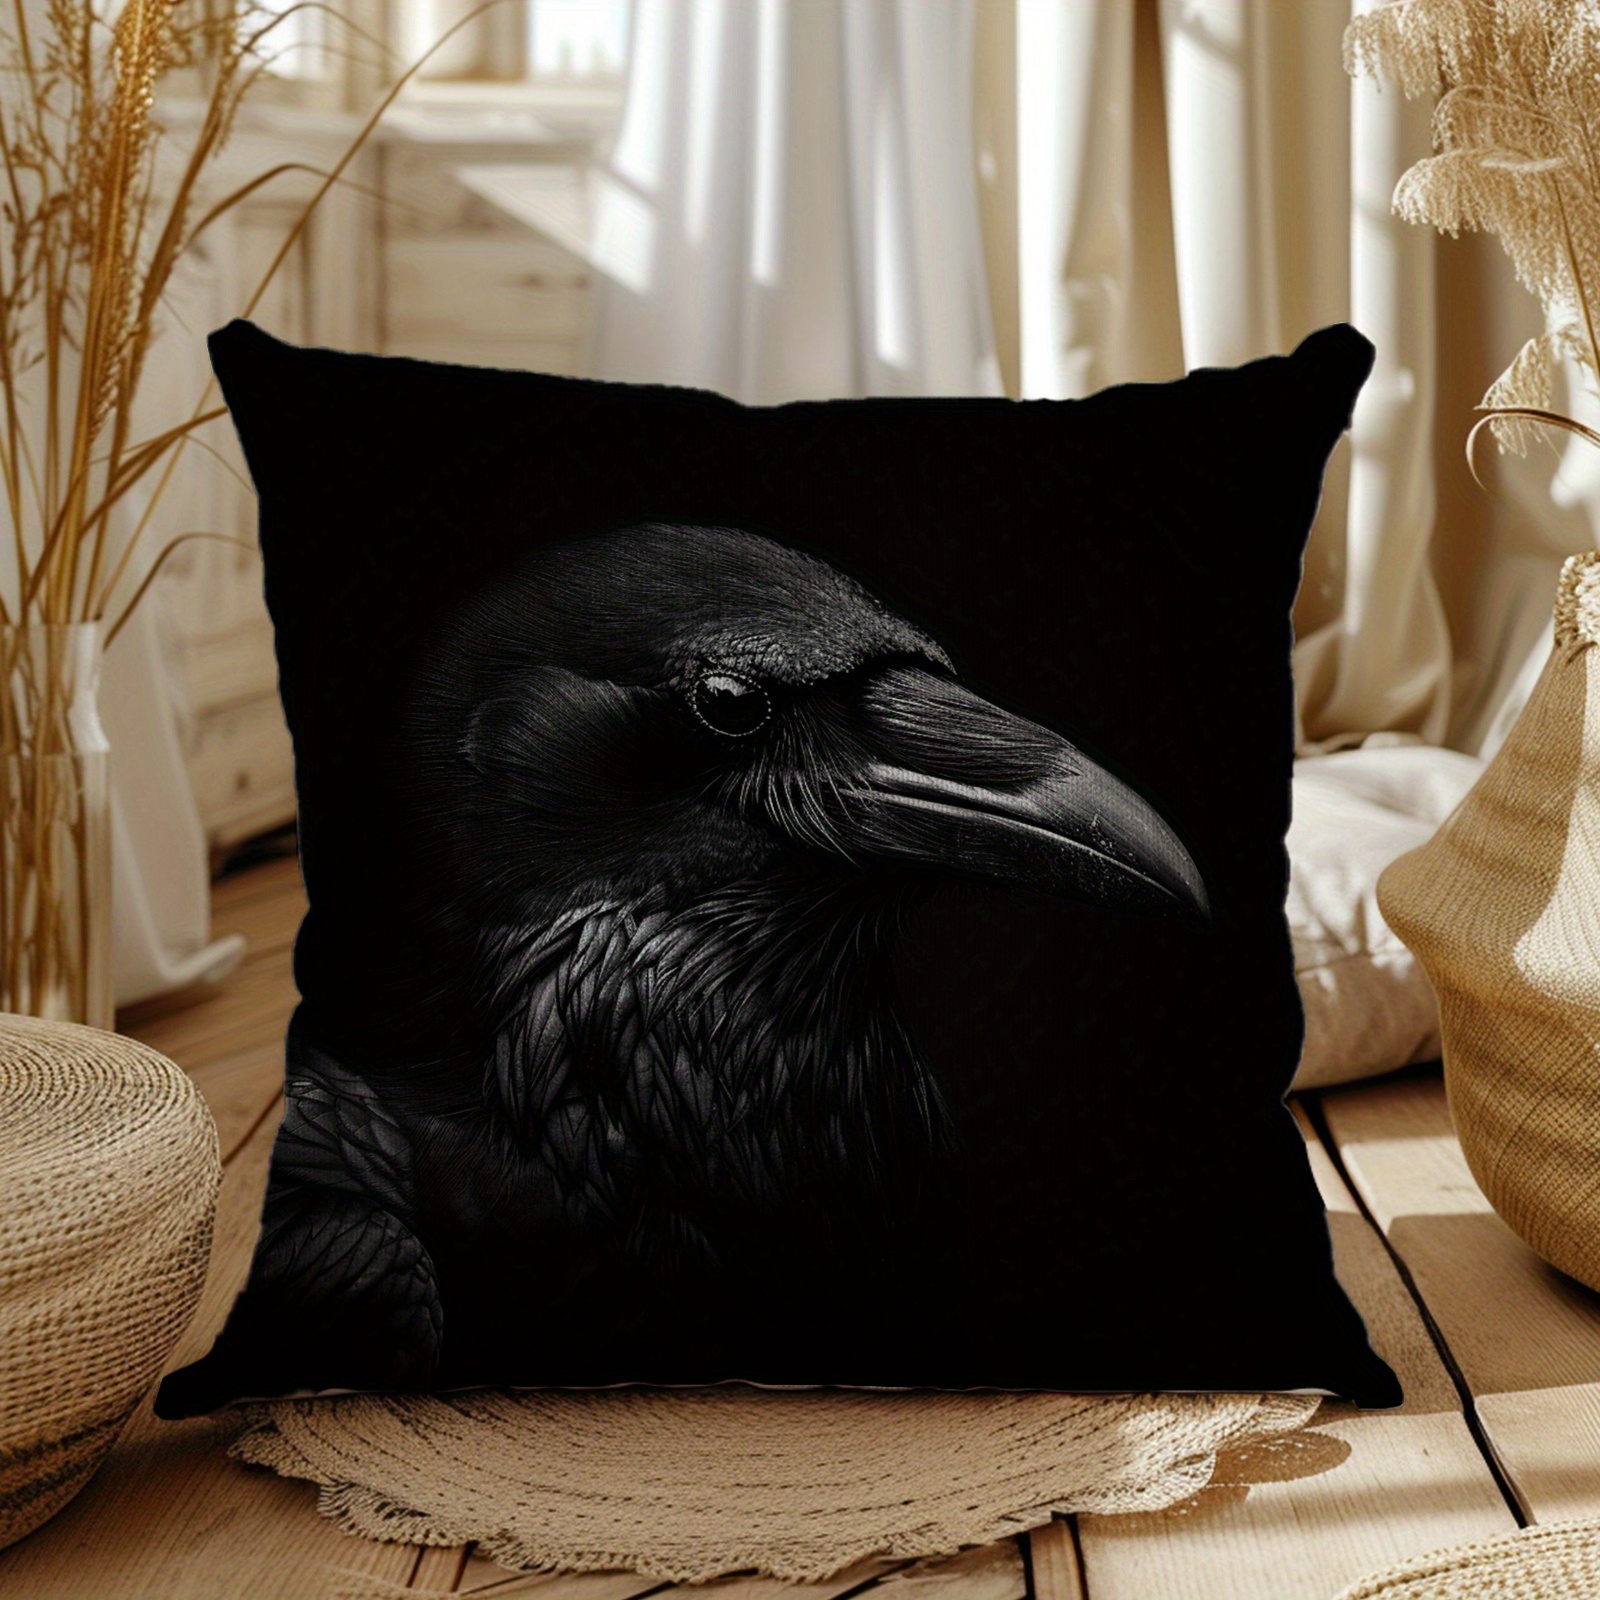 

1pc, Black Crow Decorative Outdoor Linen Throw Pillow Cover, For Living Room Bedroom Sofa And Car, No Pillow Insert, 18*18in